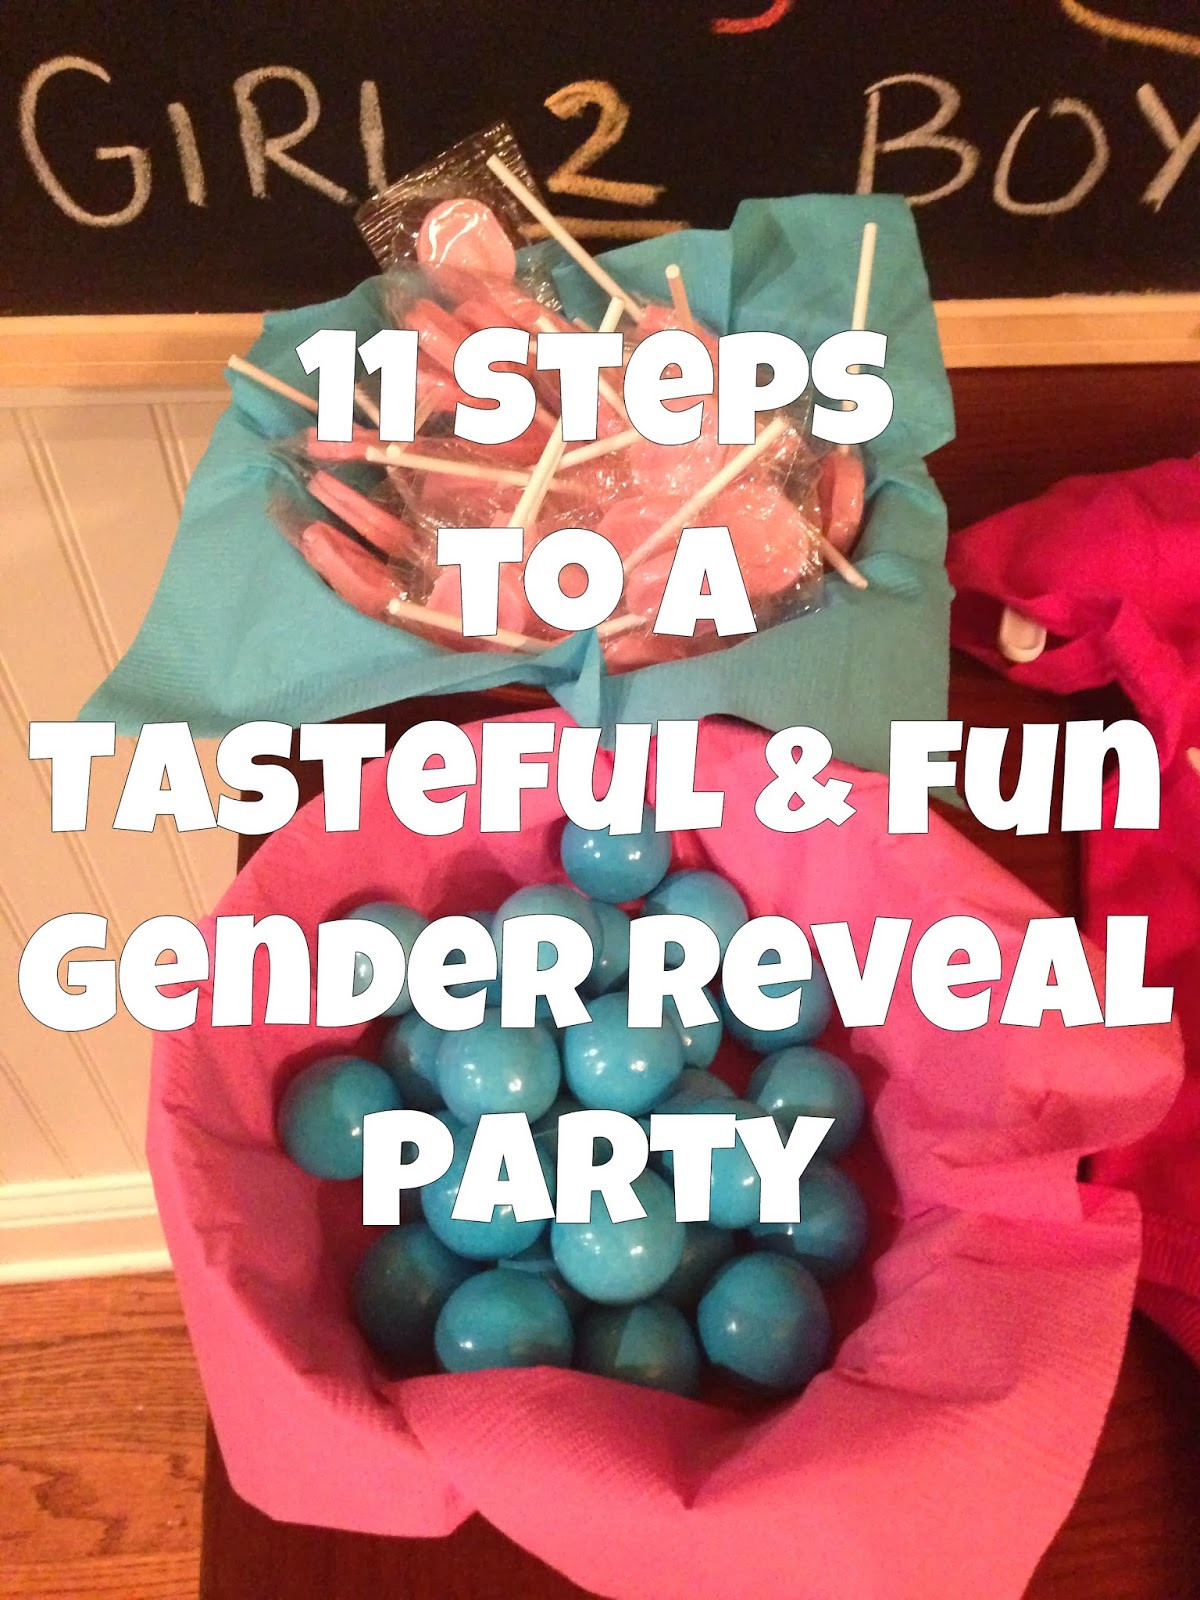 Great Gender Reveal Party Ideas
 Mother to Kings 11 Steps to a Tasteful & Fun Gender